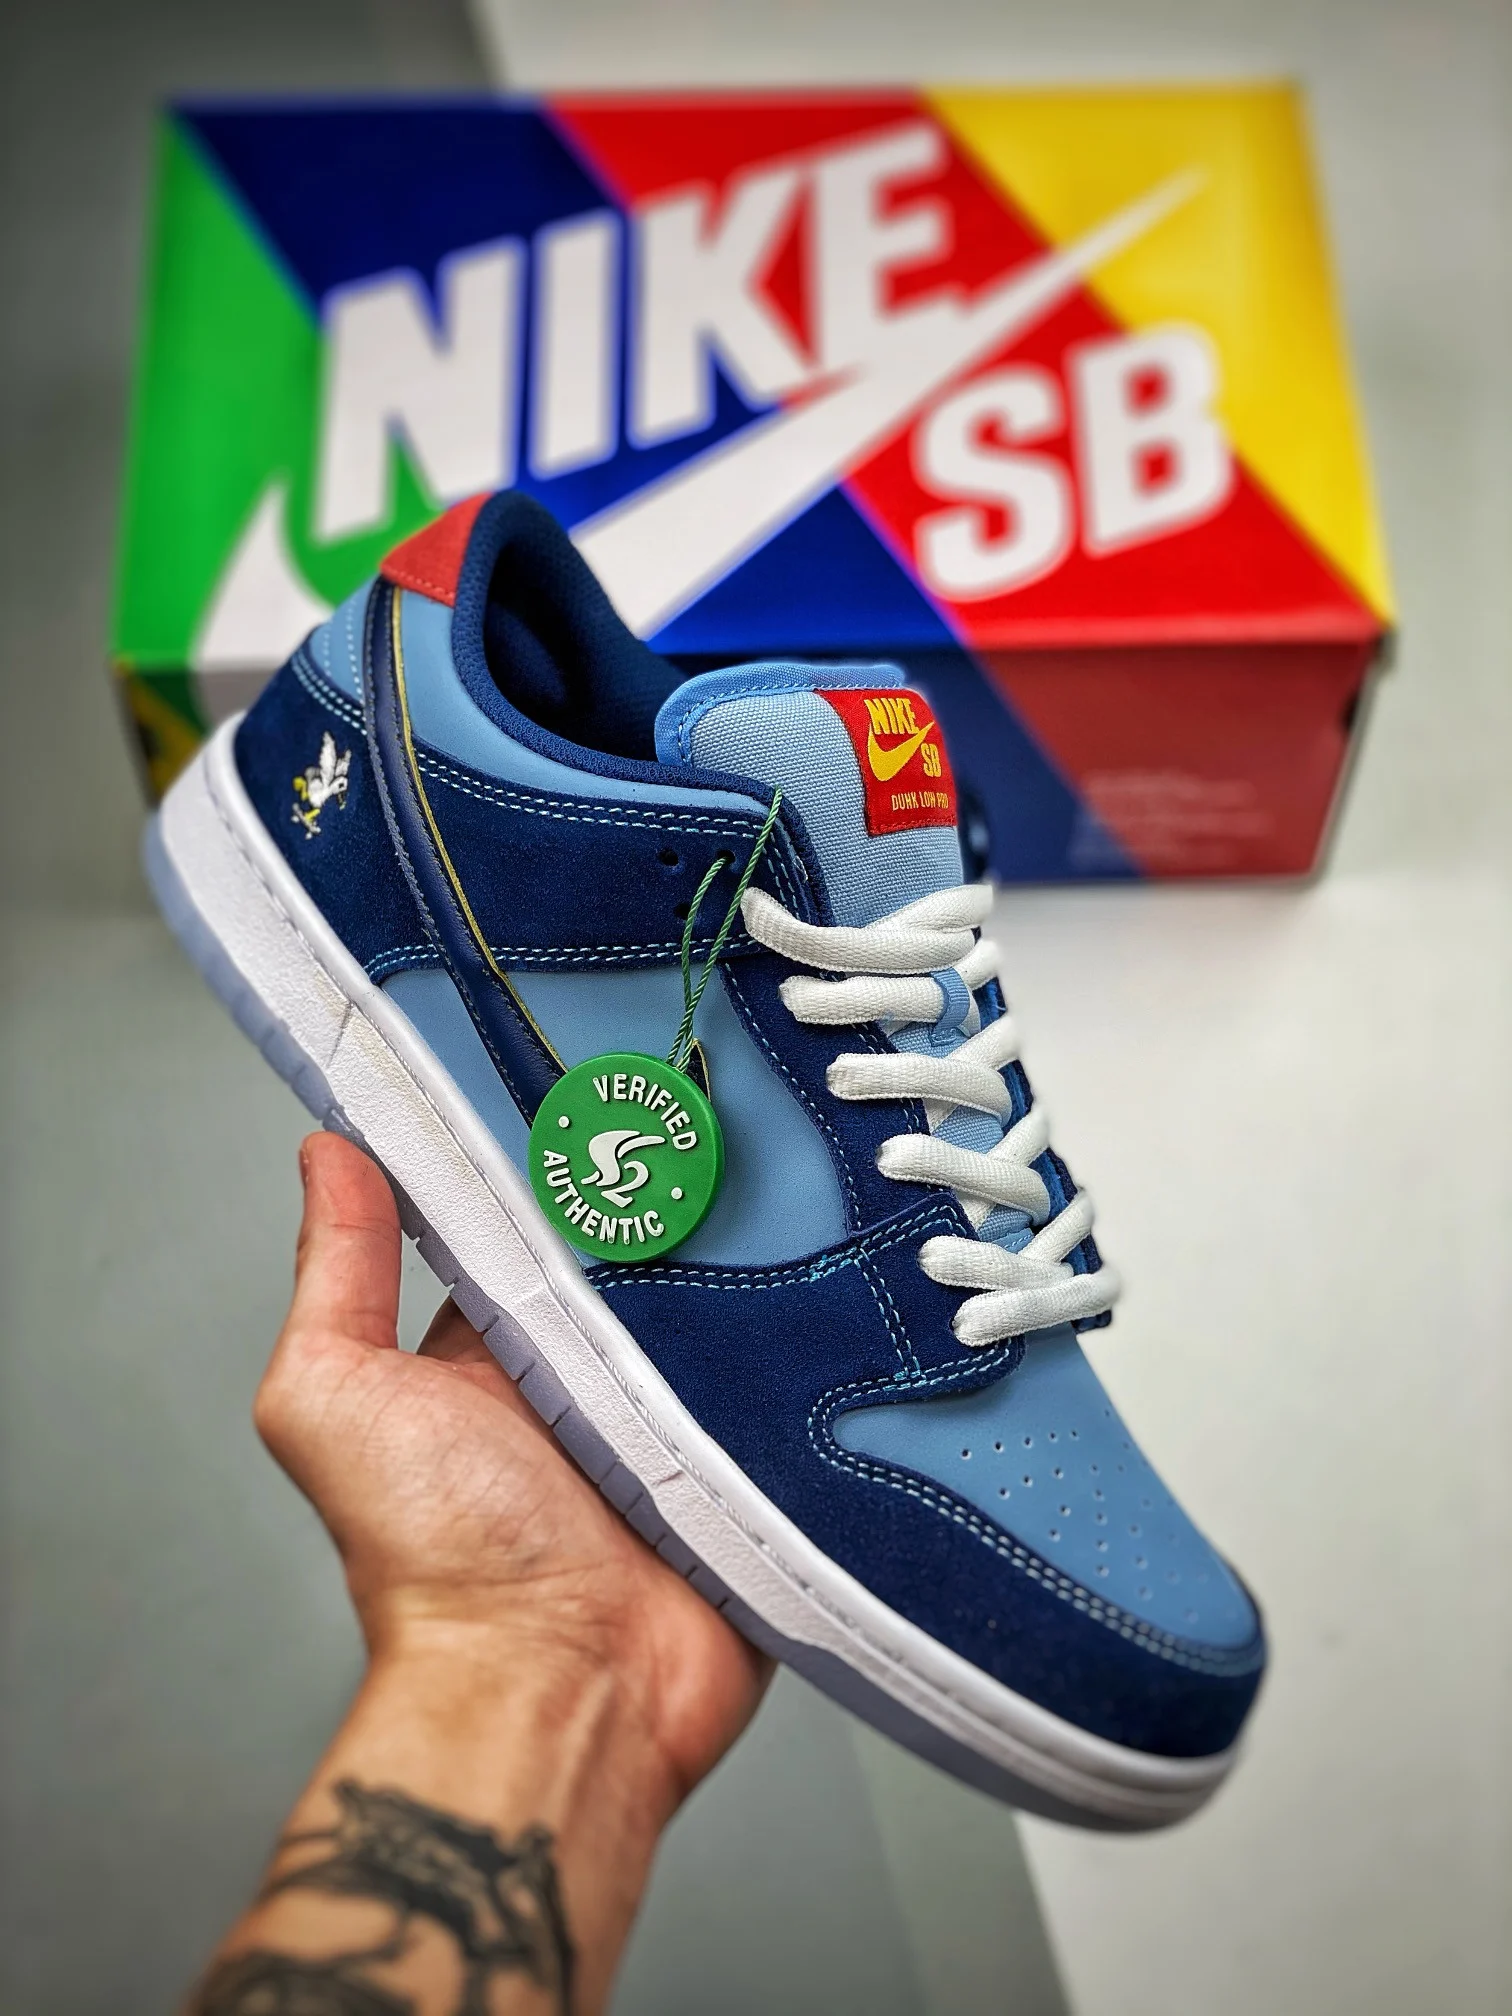 Why So Sad x Nike SB Dunk Low Coastal Blue Light Blue-Yellow-Red DX5549-400 For Sale